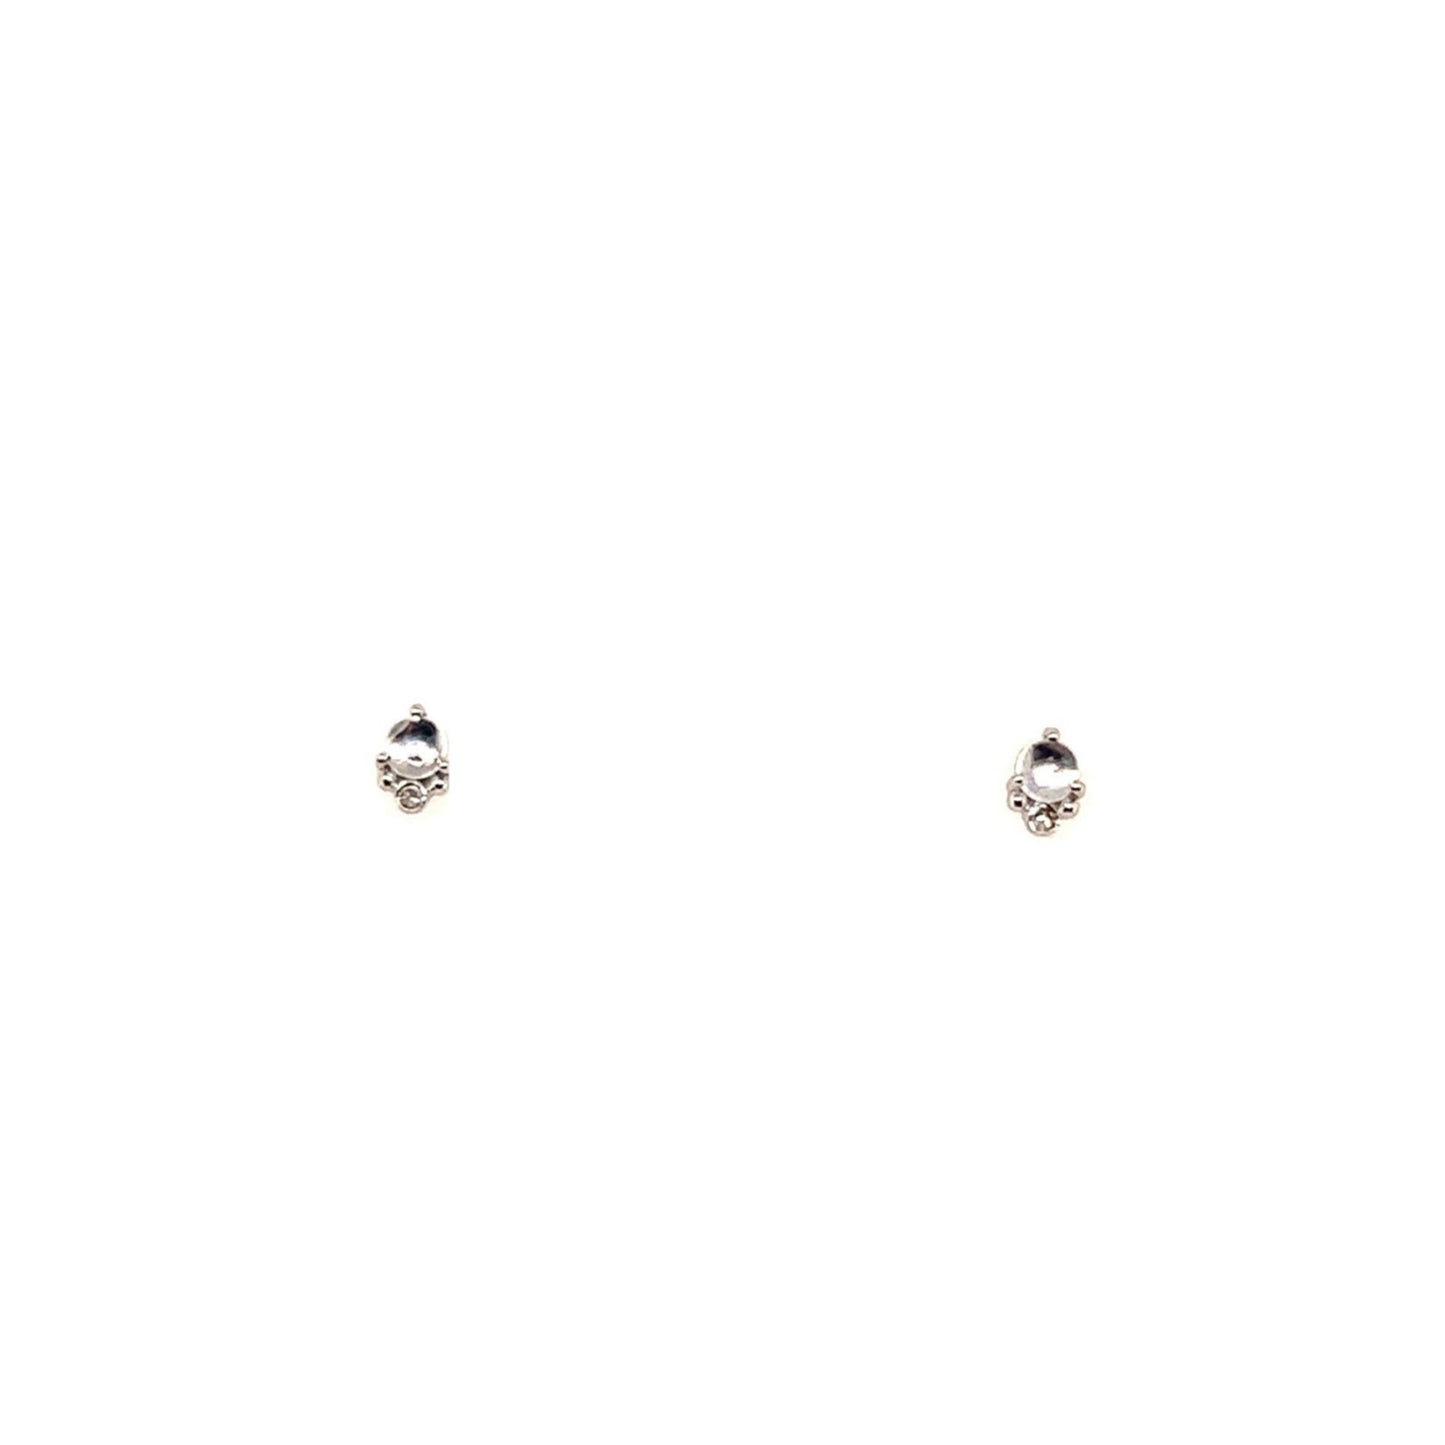 Celine Daoust 14kt White Gold Round Moonstone and Diamond Stud Earrings